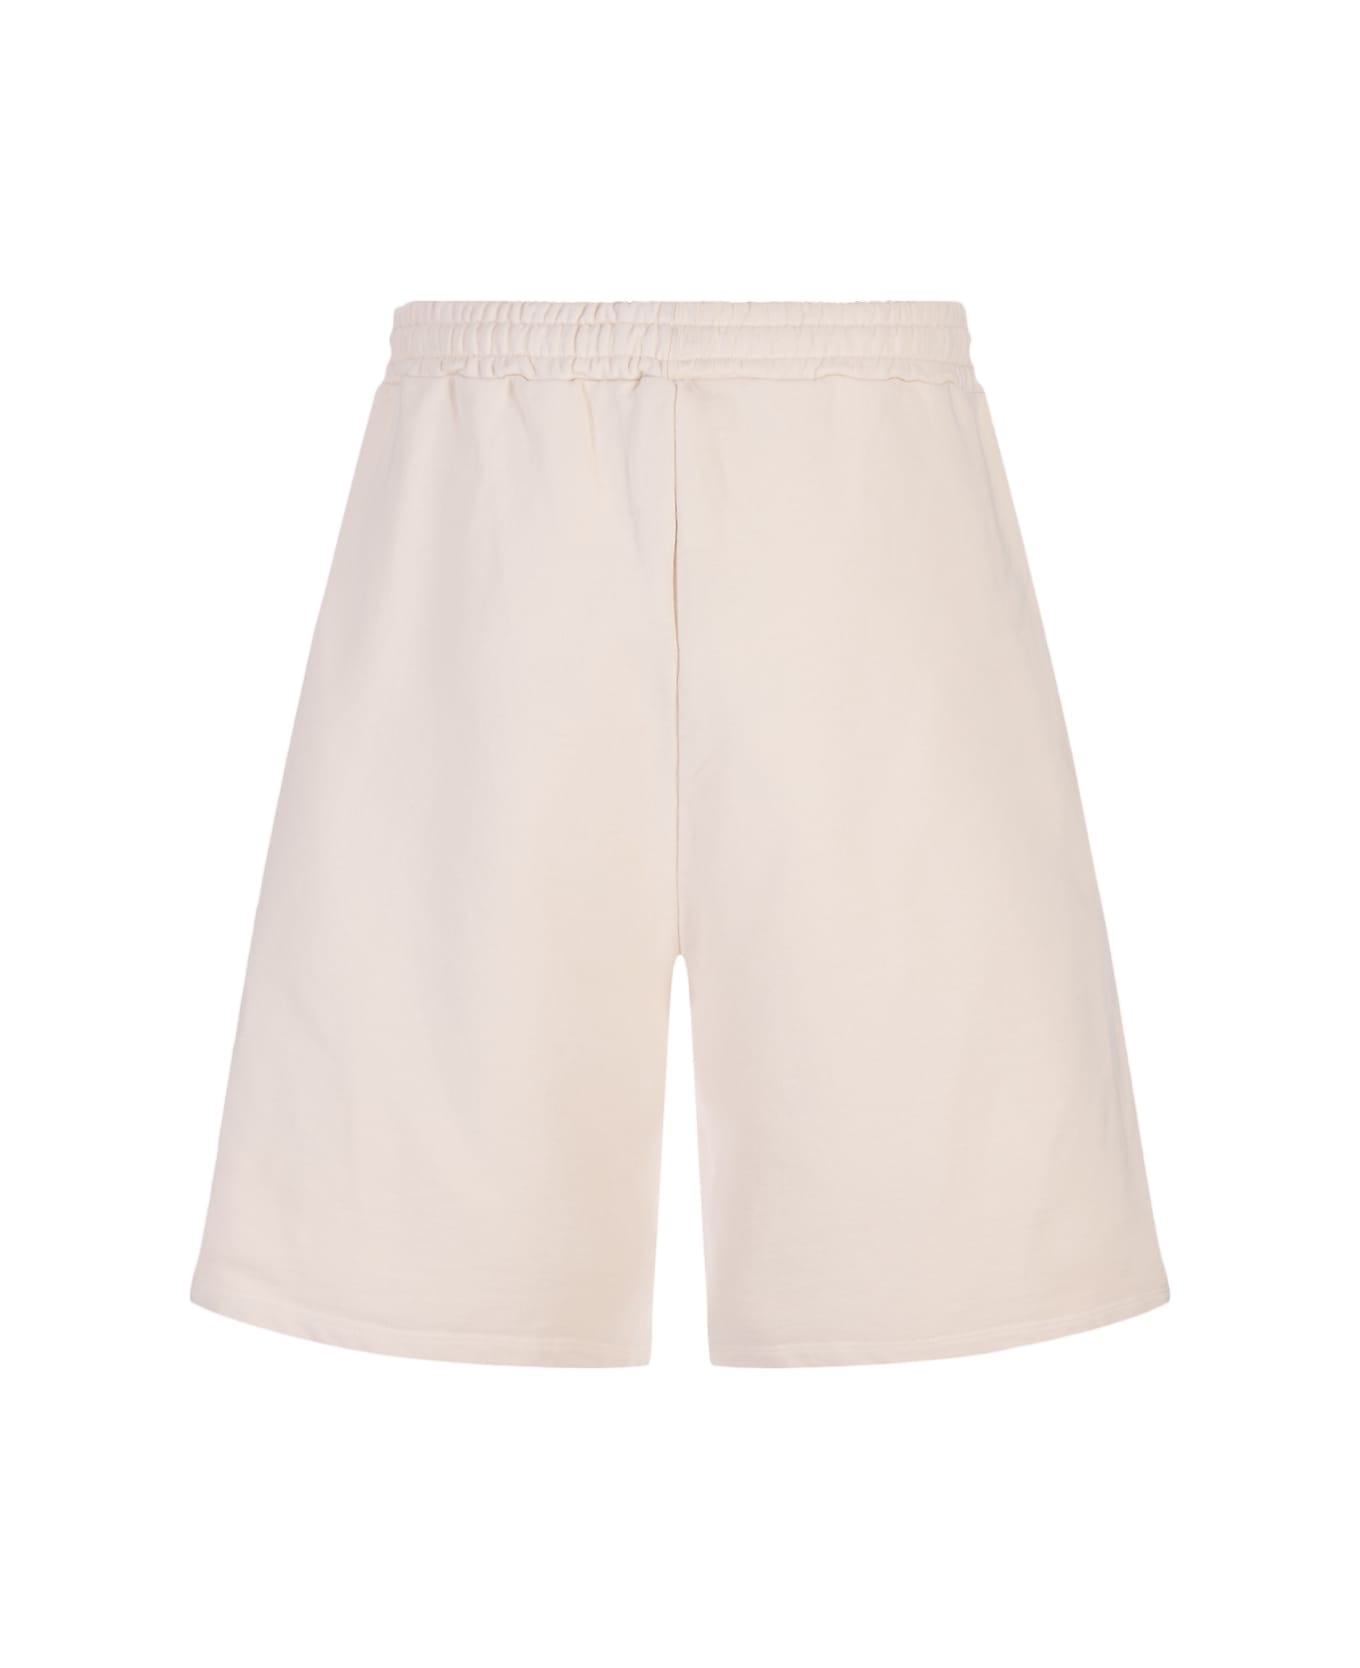 Barrow Taupe Bermuda Shorts With Lettering Prints. - Brown ショートパンツ